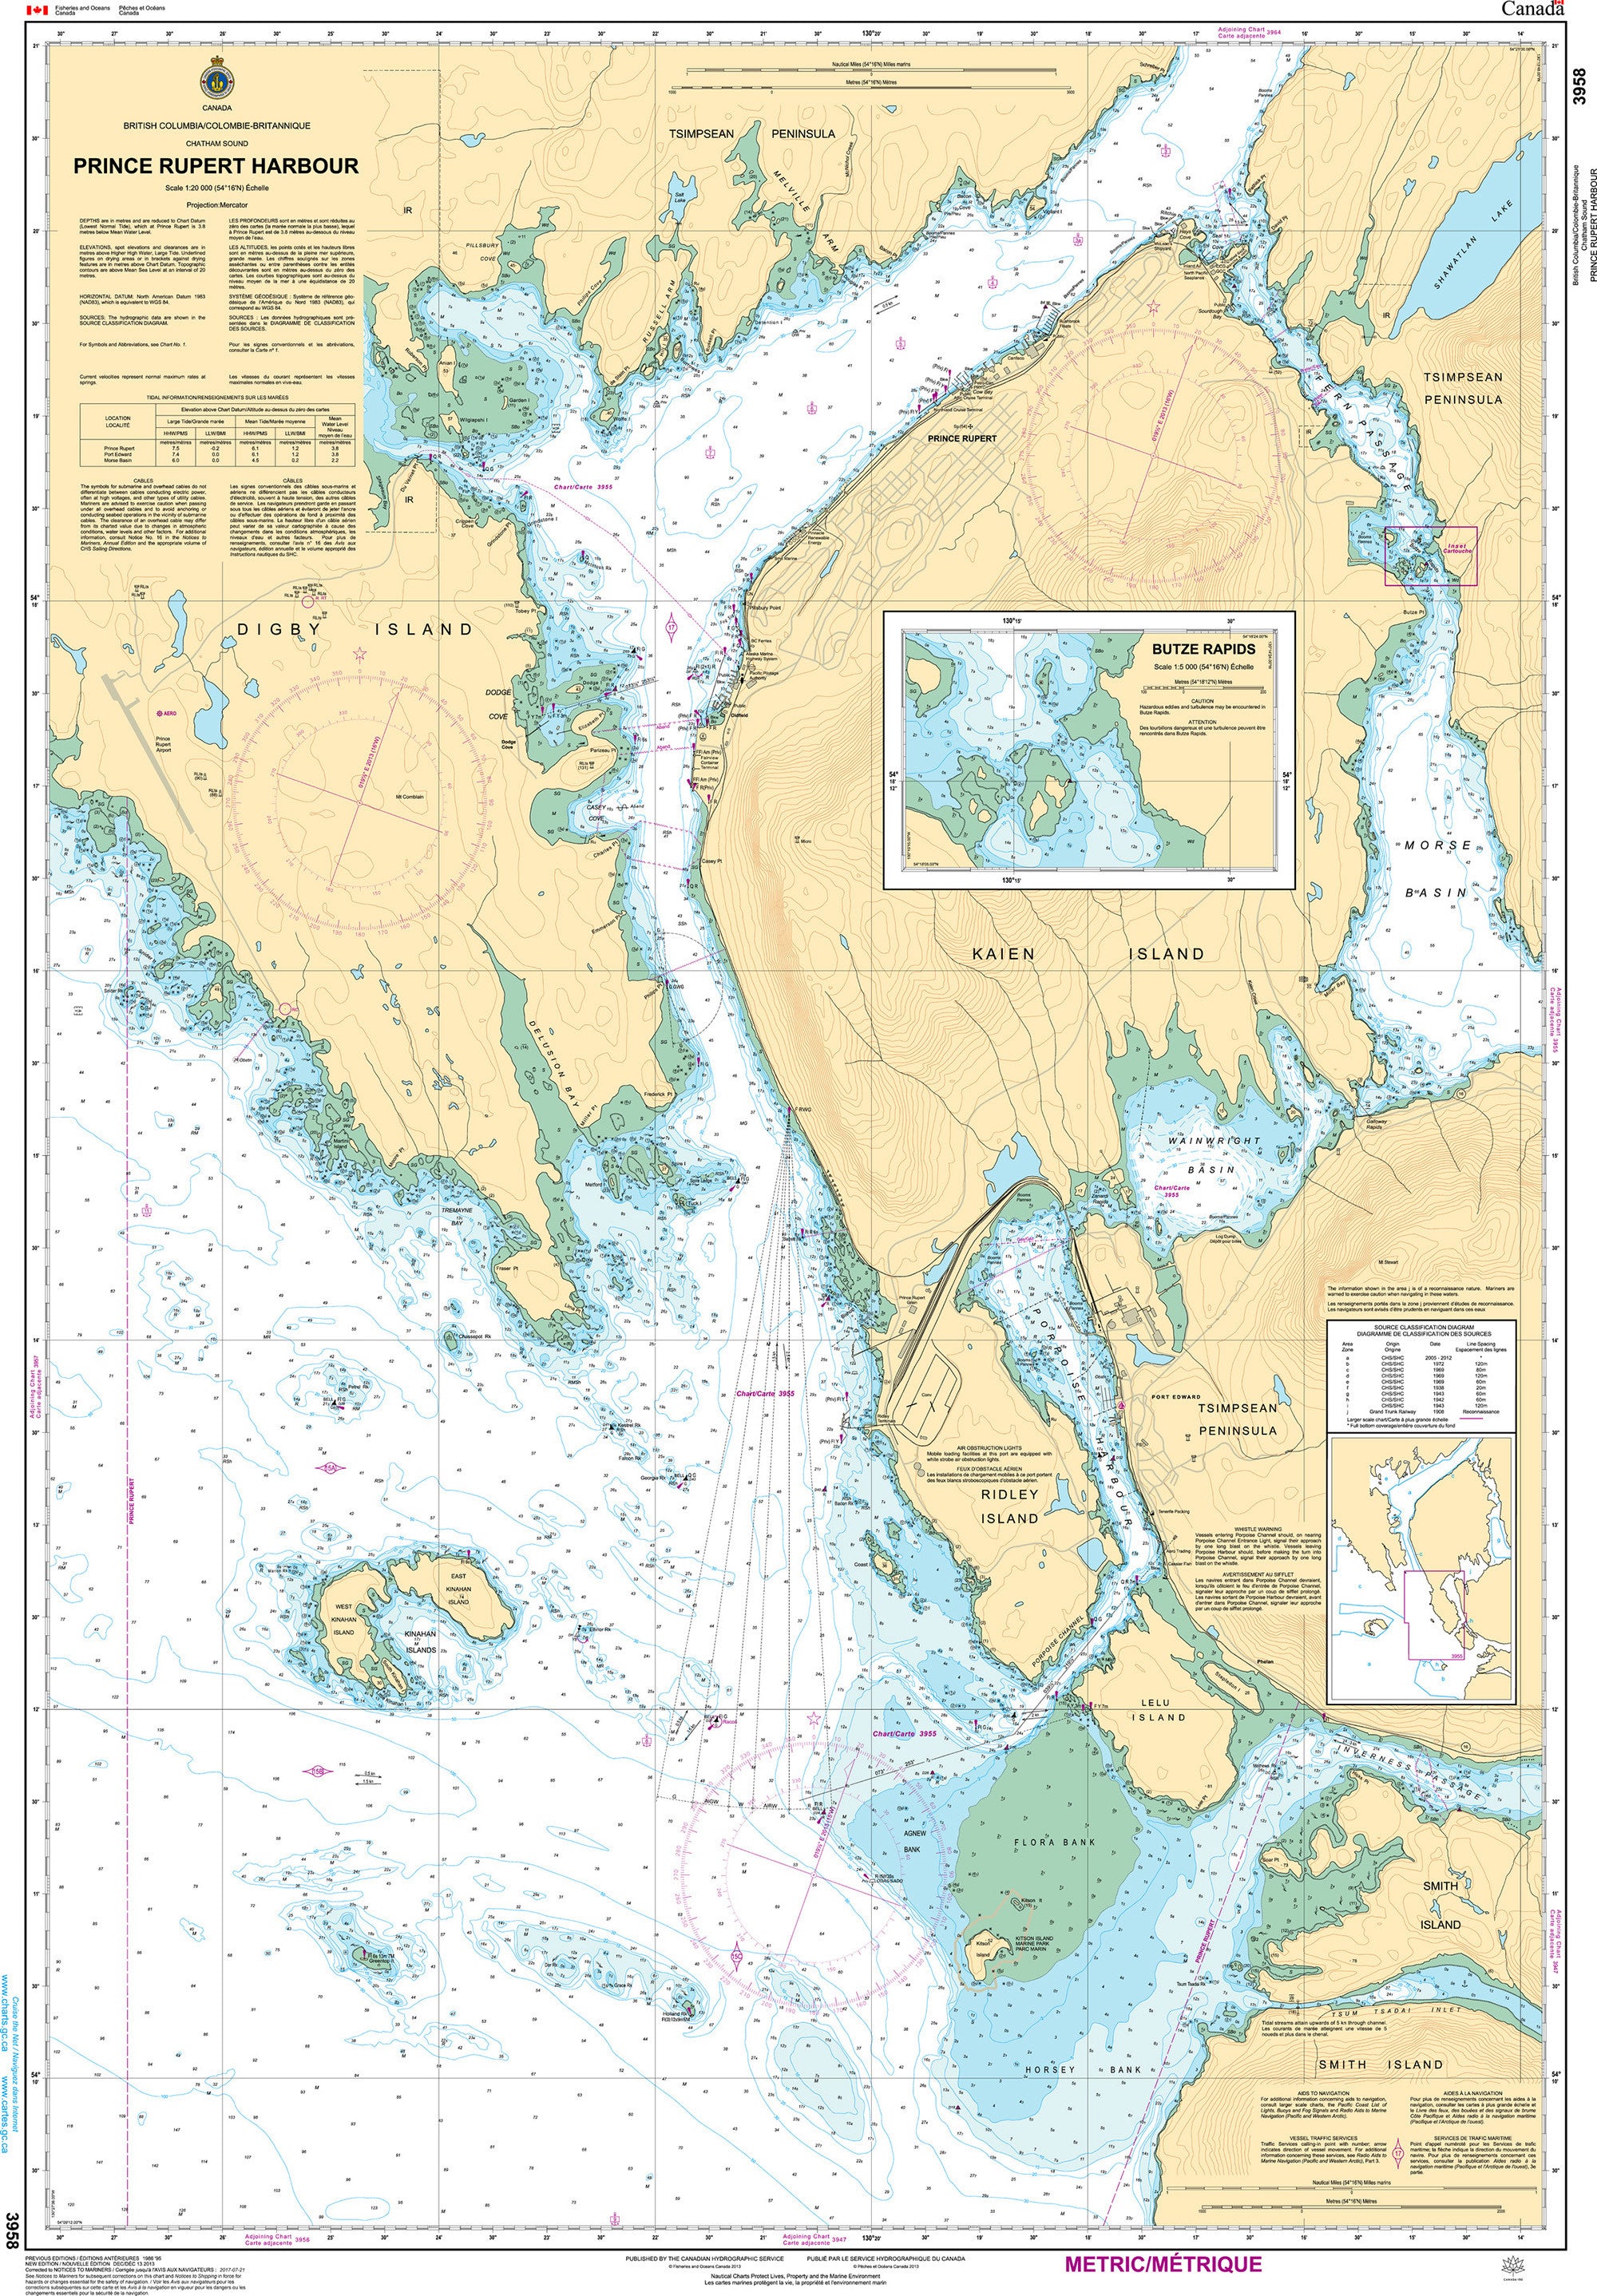 Canadian Hydrographic Service Nautical Chart CHS3958: Prince Rupert Harbour